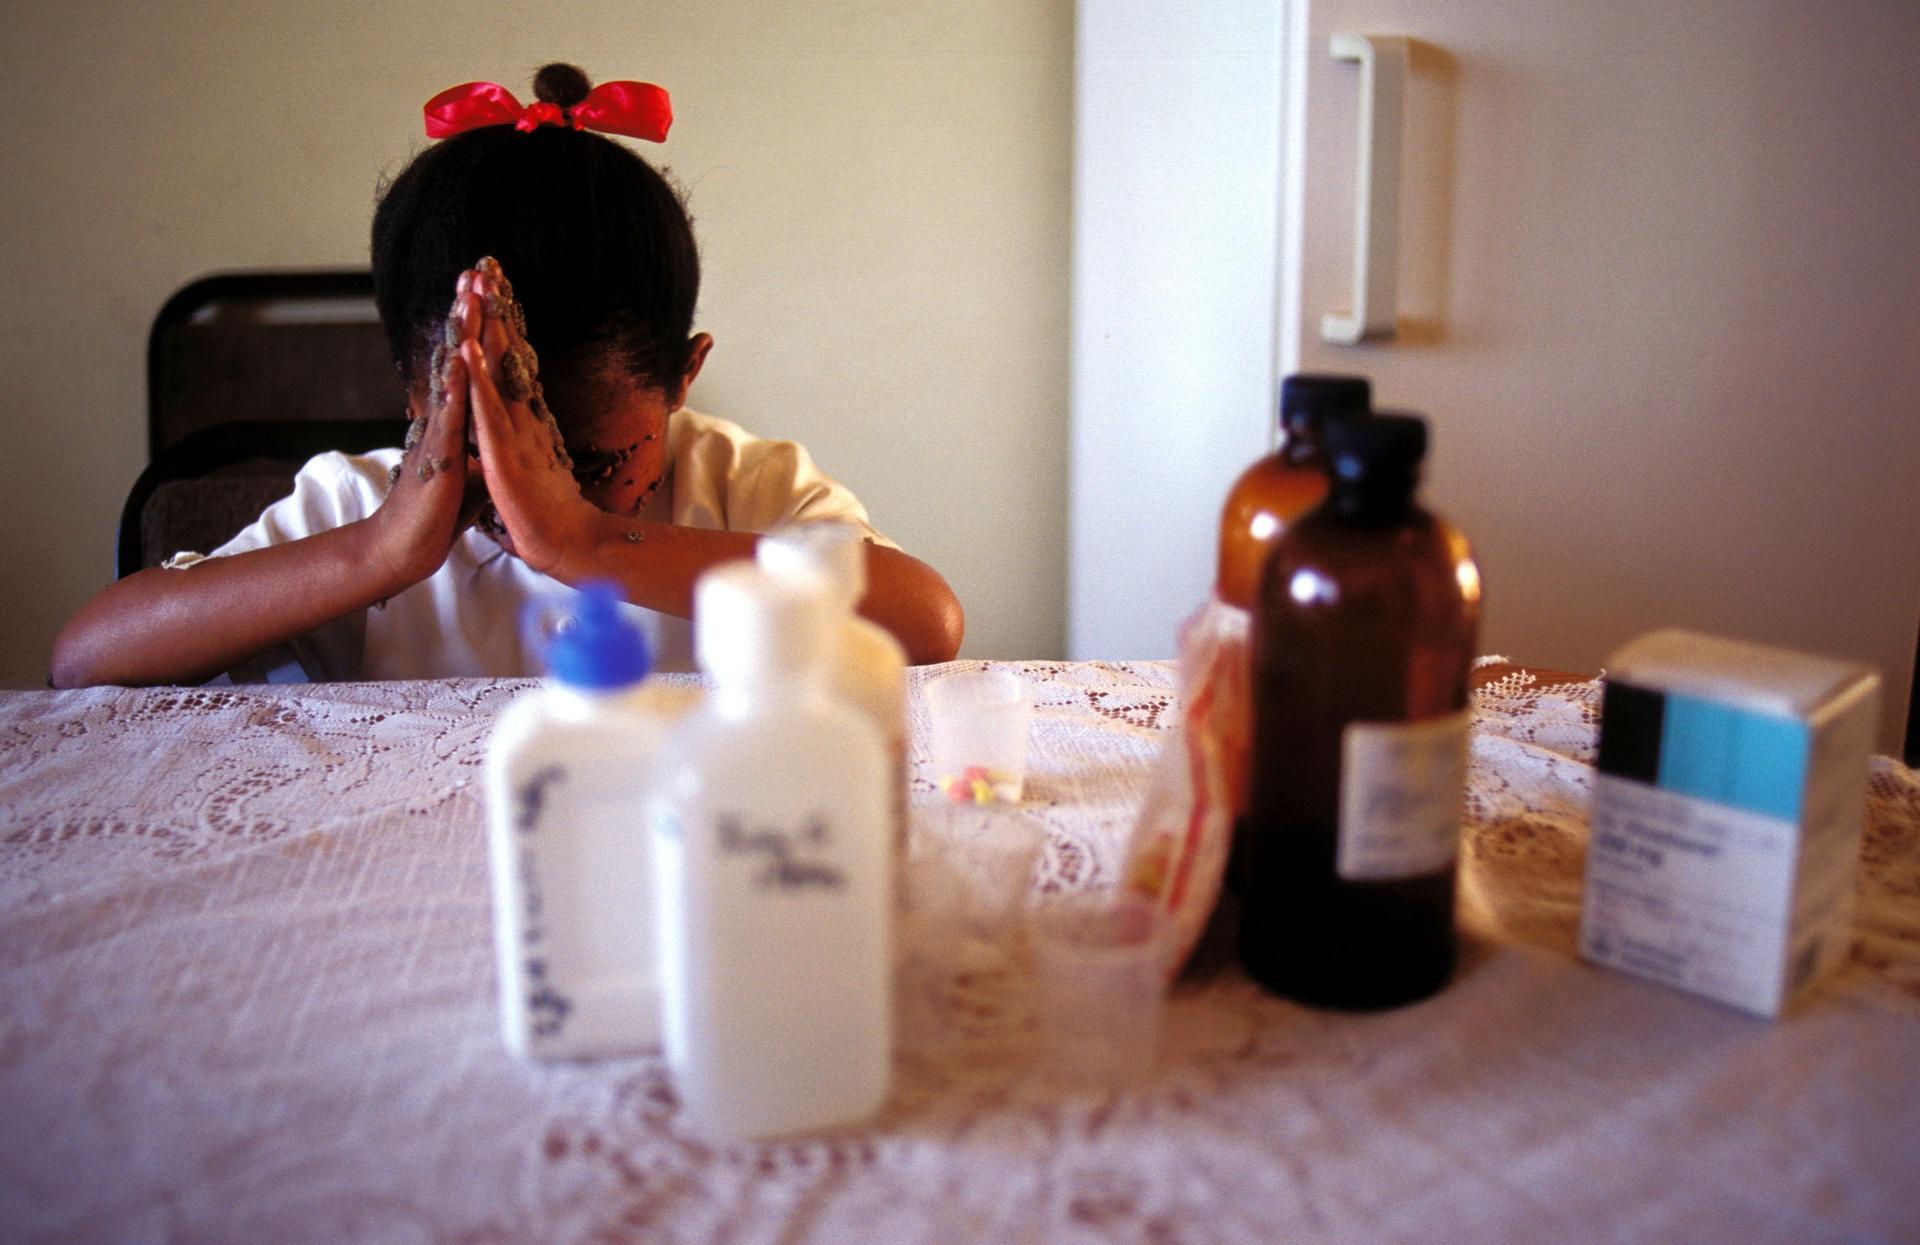 A young girl folds her hands in prayer in front of her. Out of focus, in front of her, is a group of medication bottles.